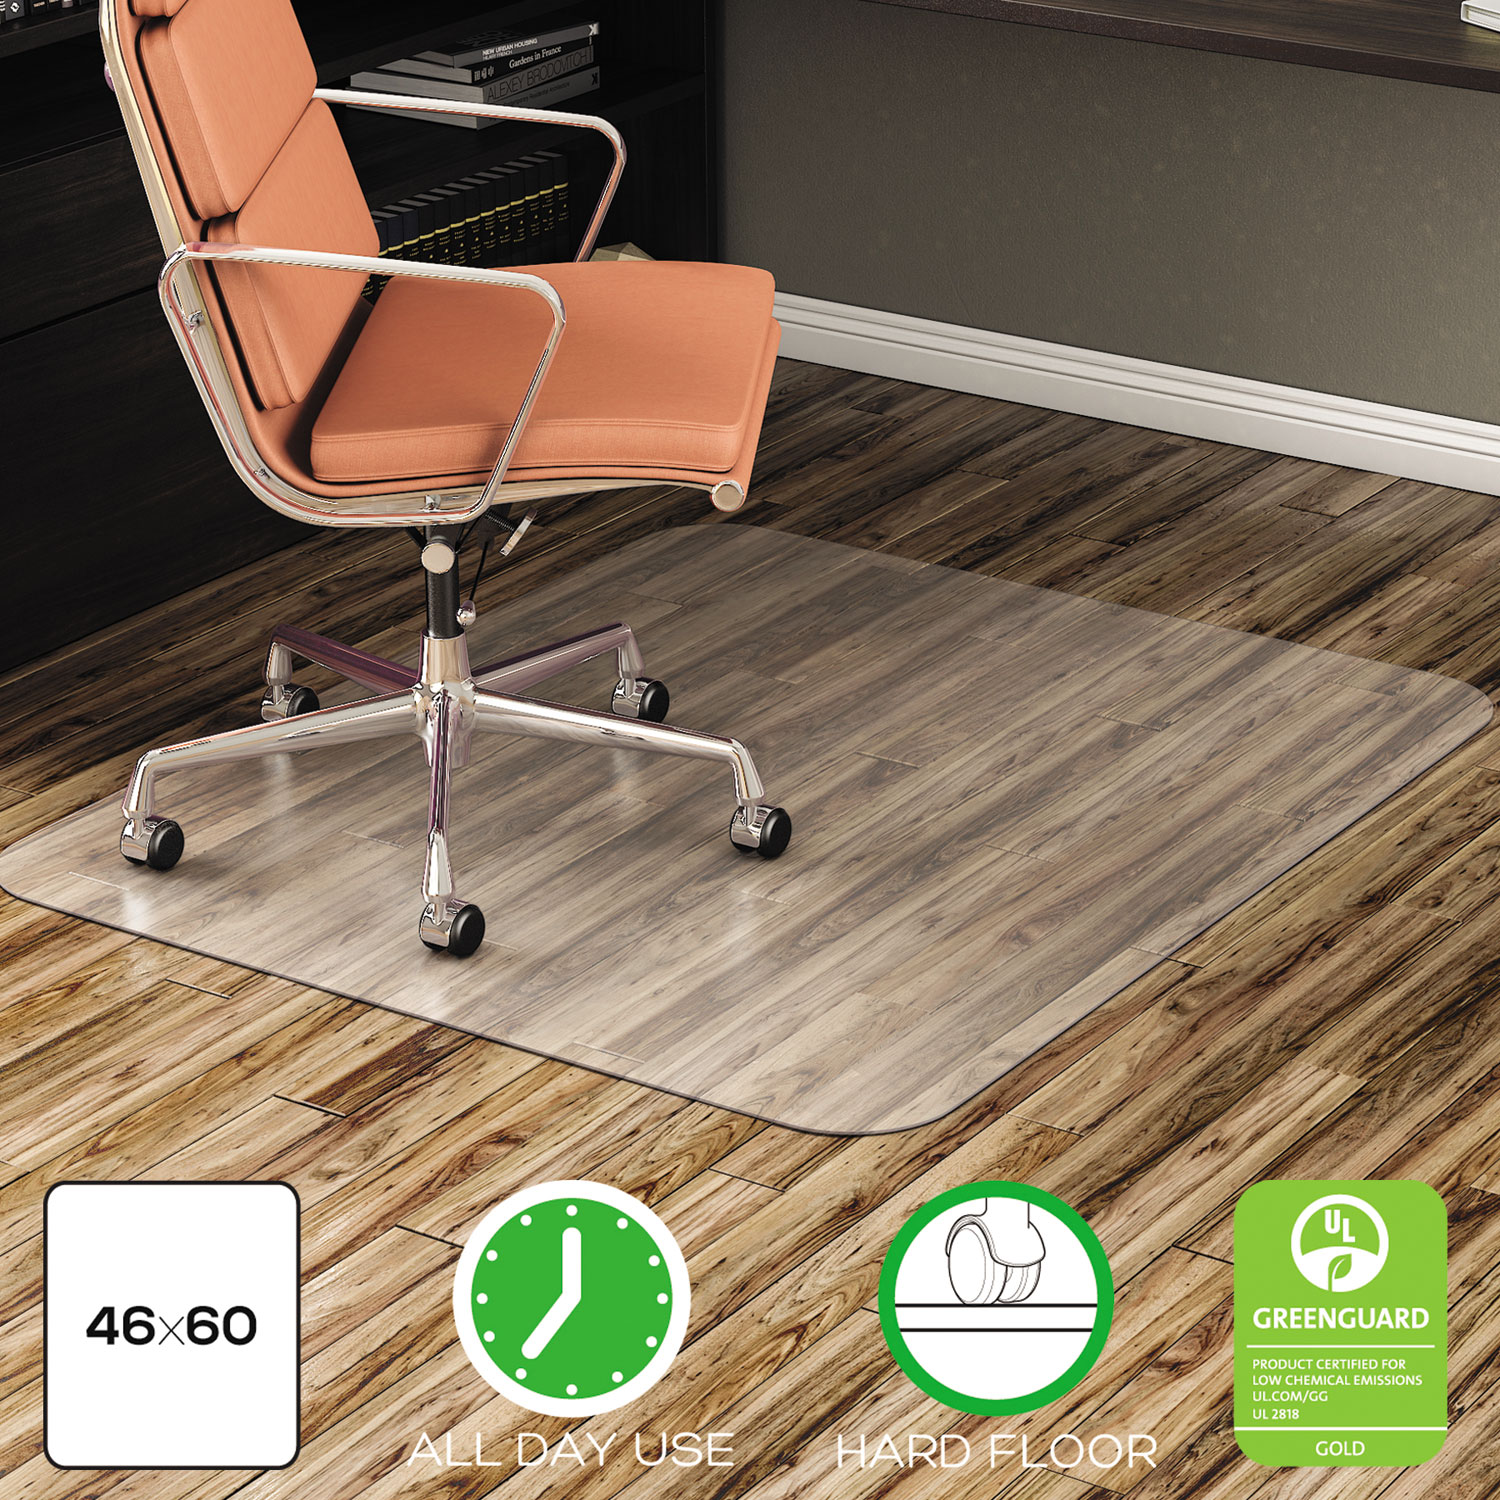 EconoMat All Day Use Chair Mat for Hard Floors, 46 x 60, Clear, Drop Ship Item